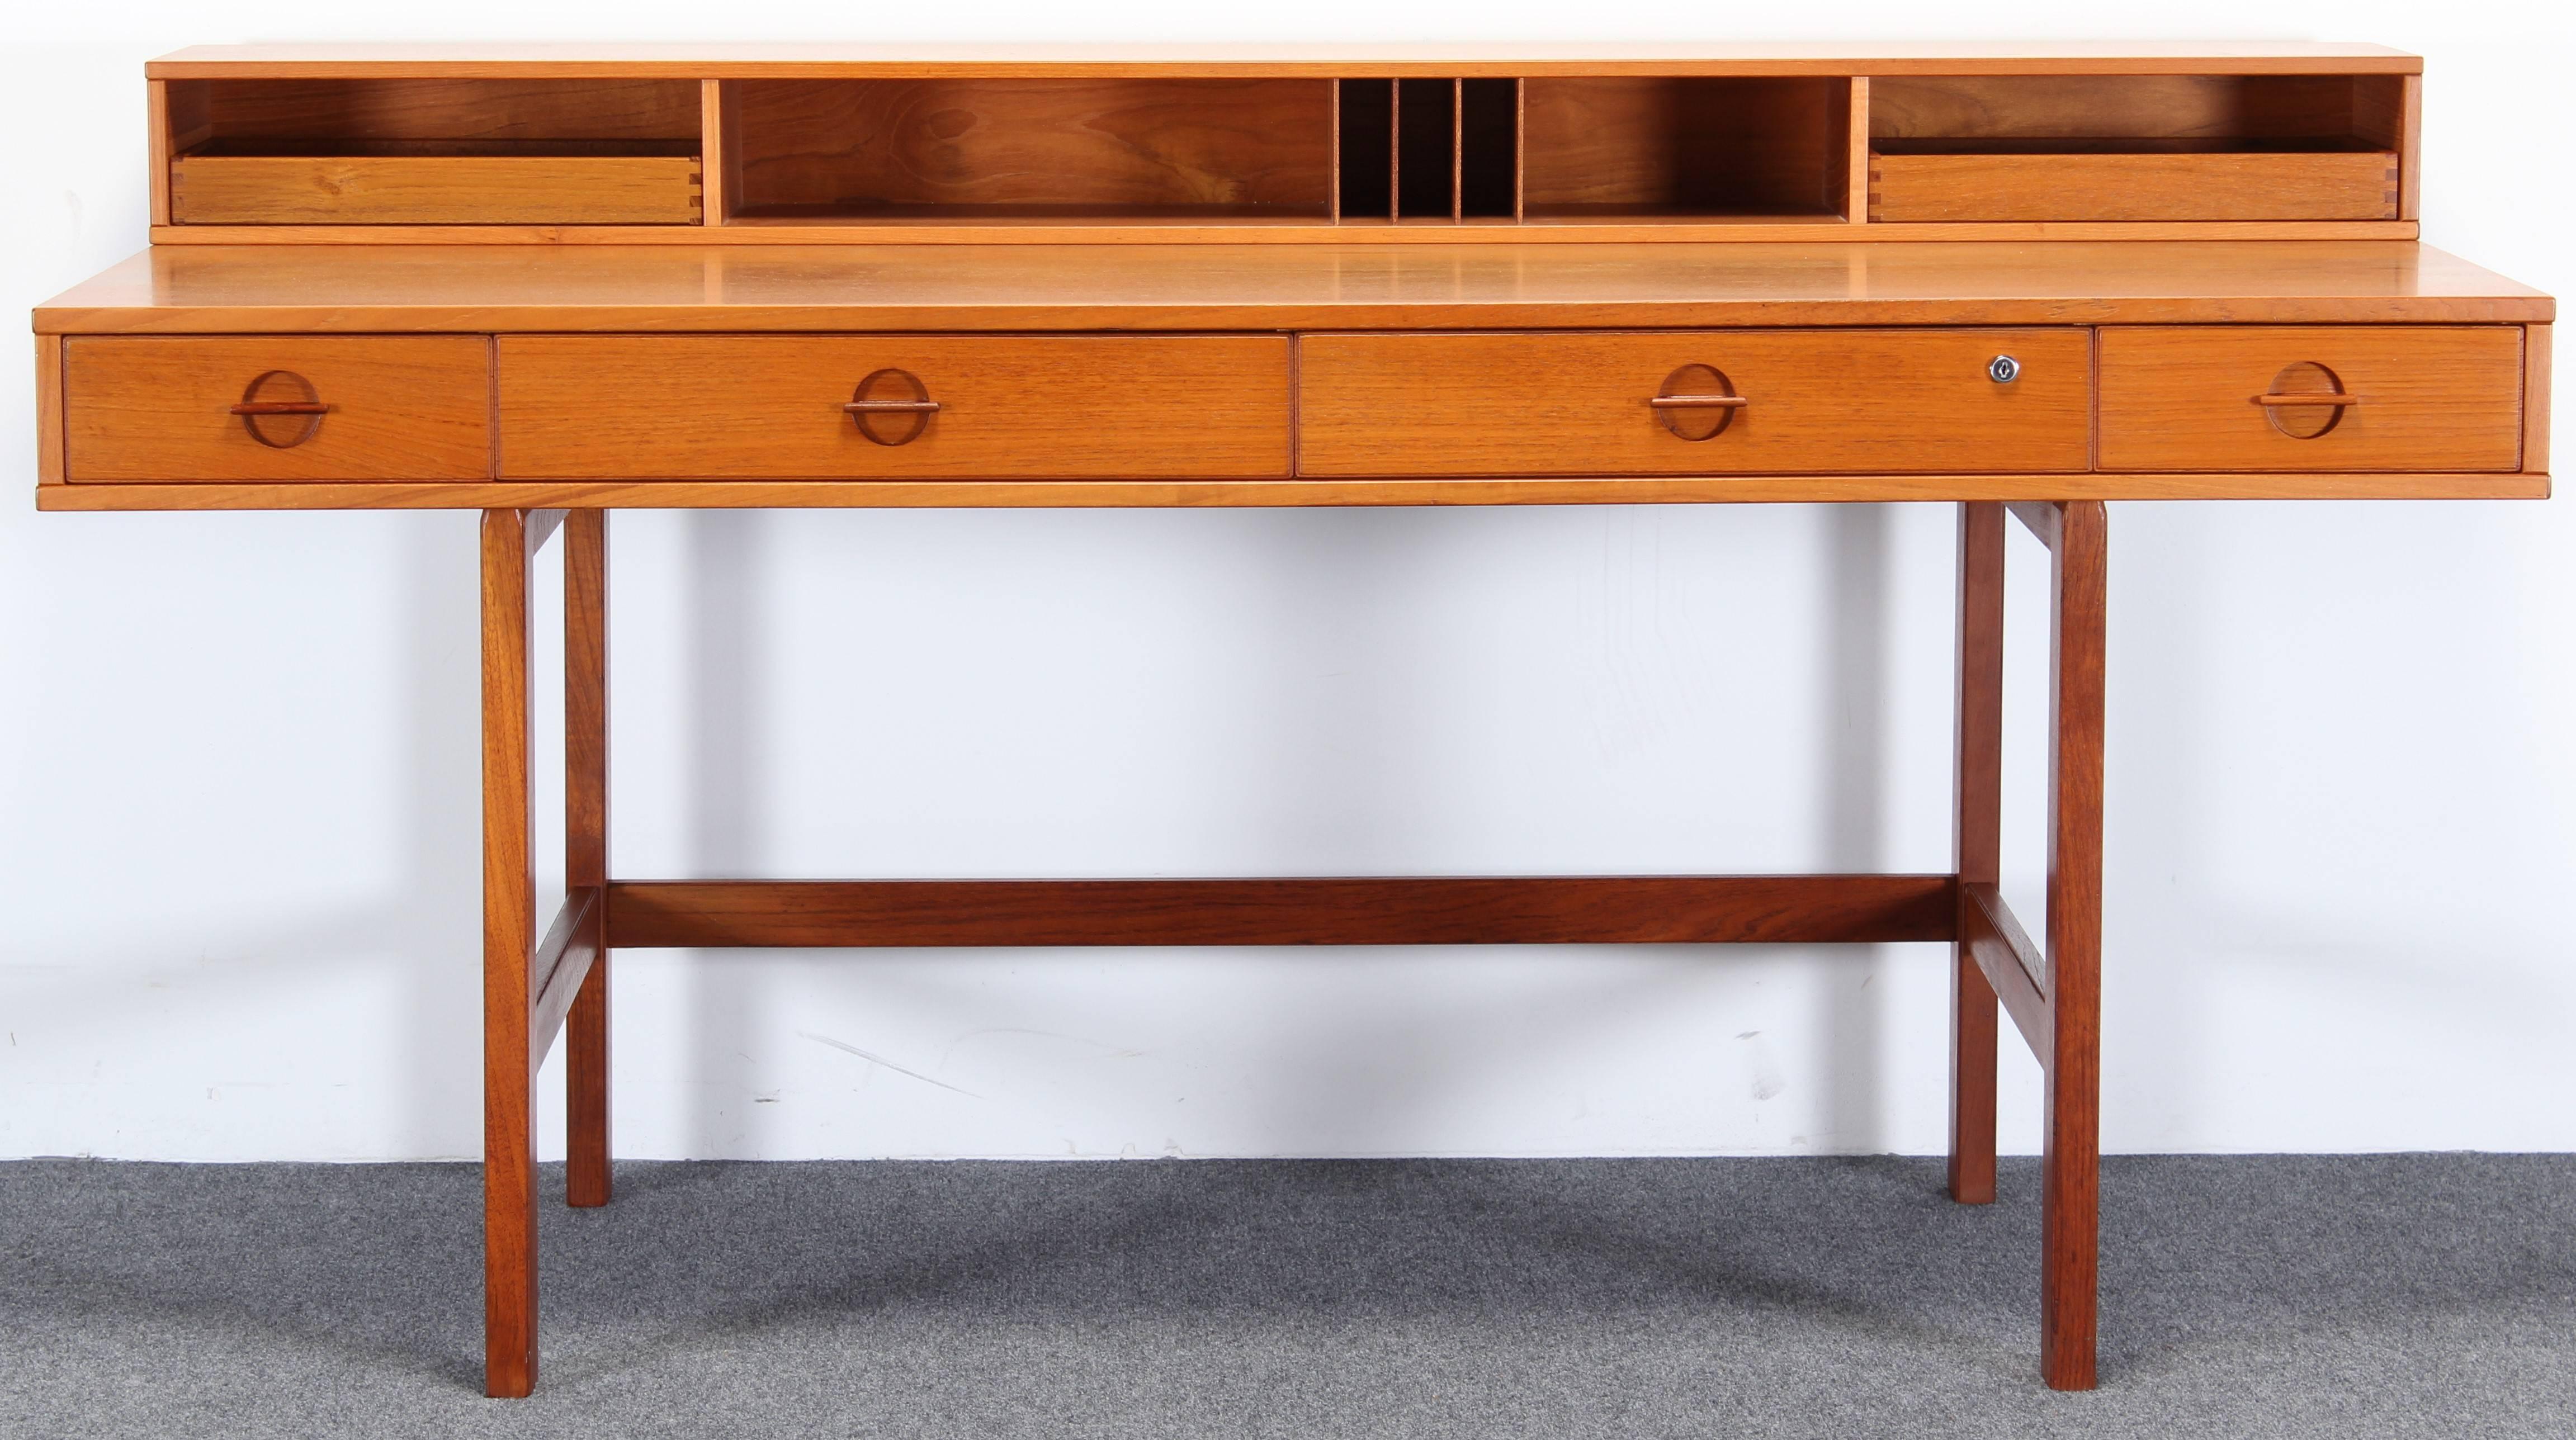 Designed by Peter Lovig-Nielsen, sometimes attributed to Jens Quistgaard. Teak wood desk with four drawers, no key for lock, drawer is currently unlocked. Height of flip-top up is 34 inches, depth of desk is 38 inches when flip-top is down. Overall